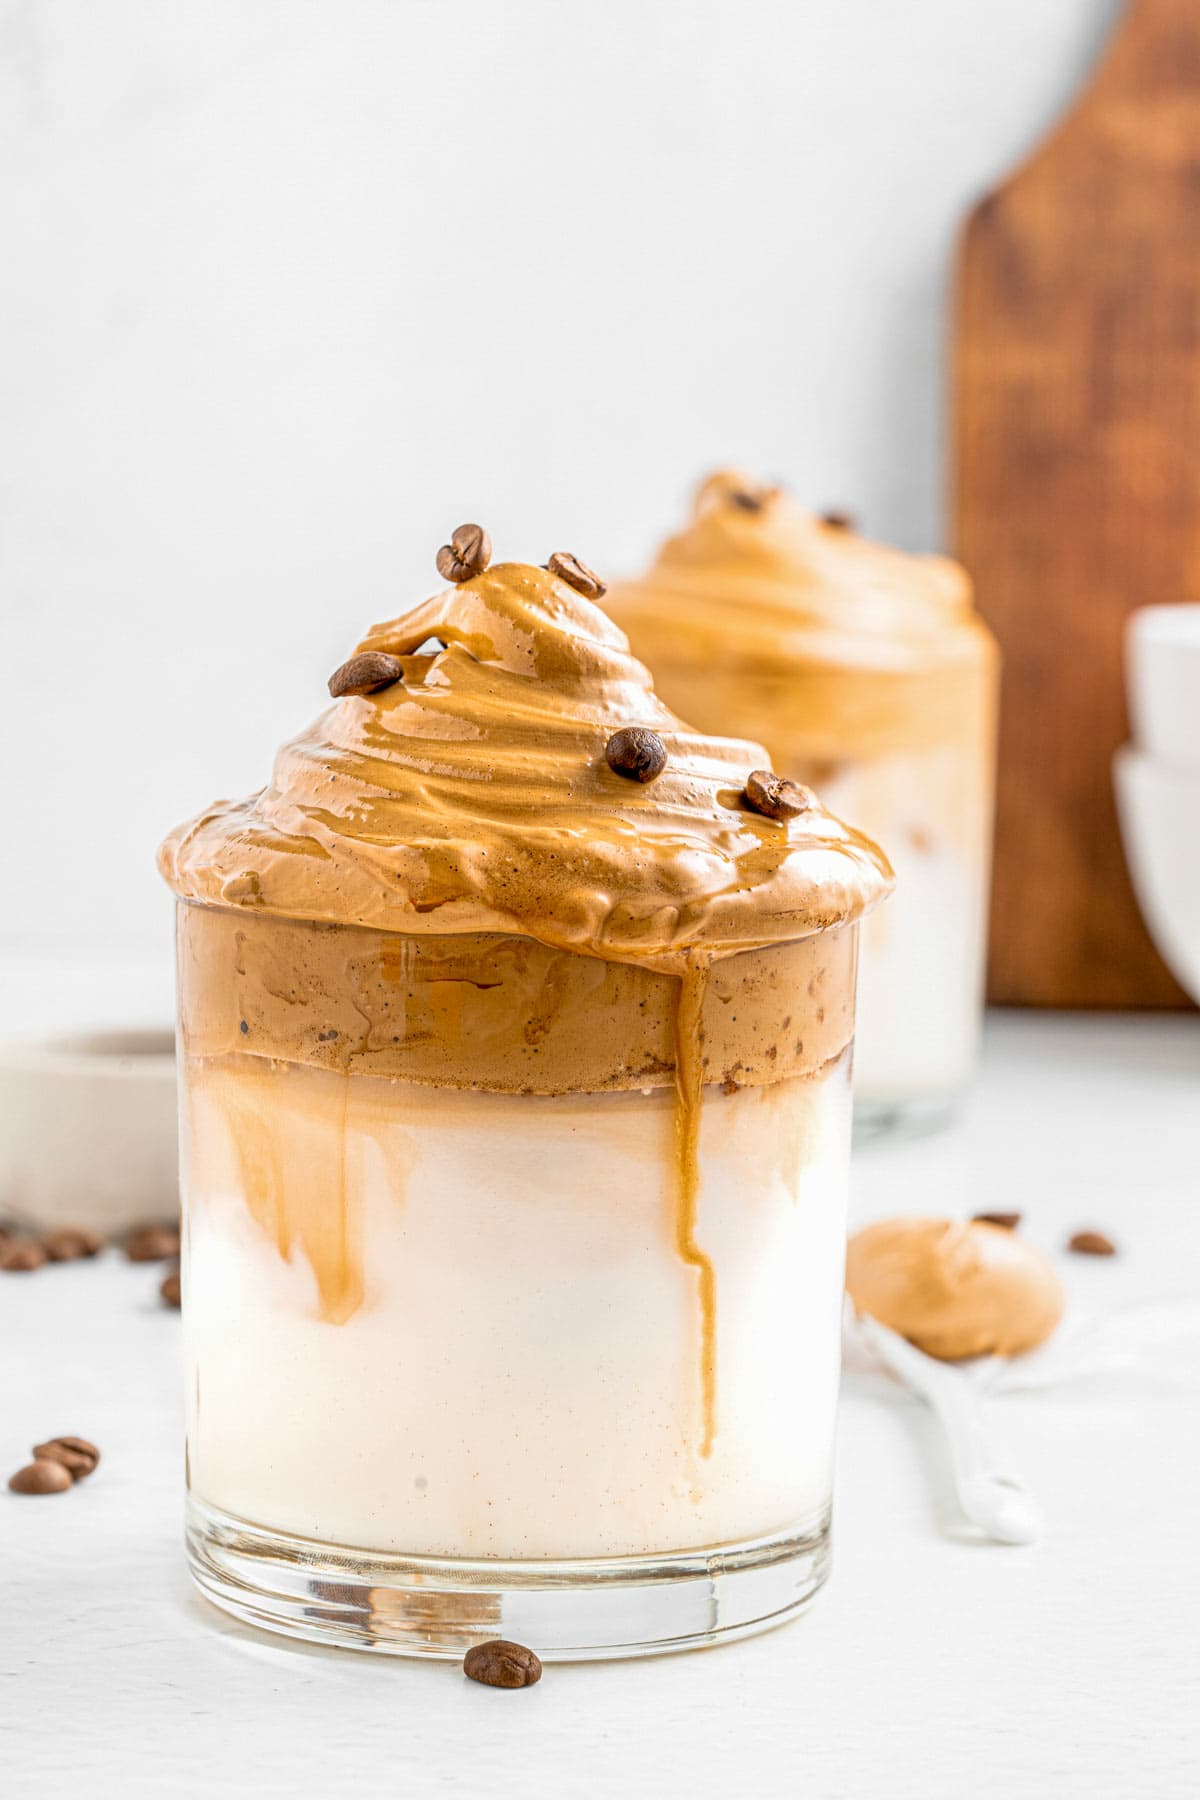 This Dalgona Whipped Iced Coffee recipe calls for four simple ingredients to make the best homemade iced coffee drink. Indulge yourself in the most delicious iced drink with fluffy clouds of whipped coffee over milk. An easy, creamy and superb refreshing drink to enjoy this summer. It only takes about 5 minutes to whip up! - The Yummy Bowl